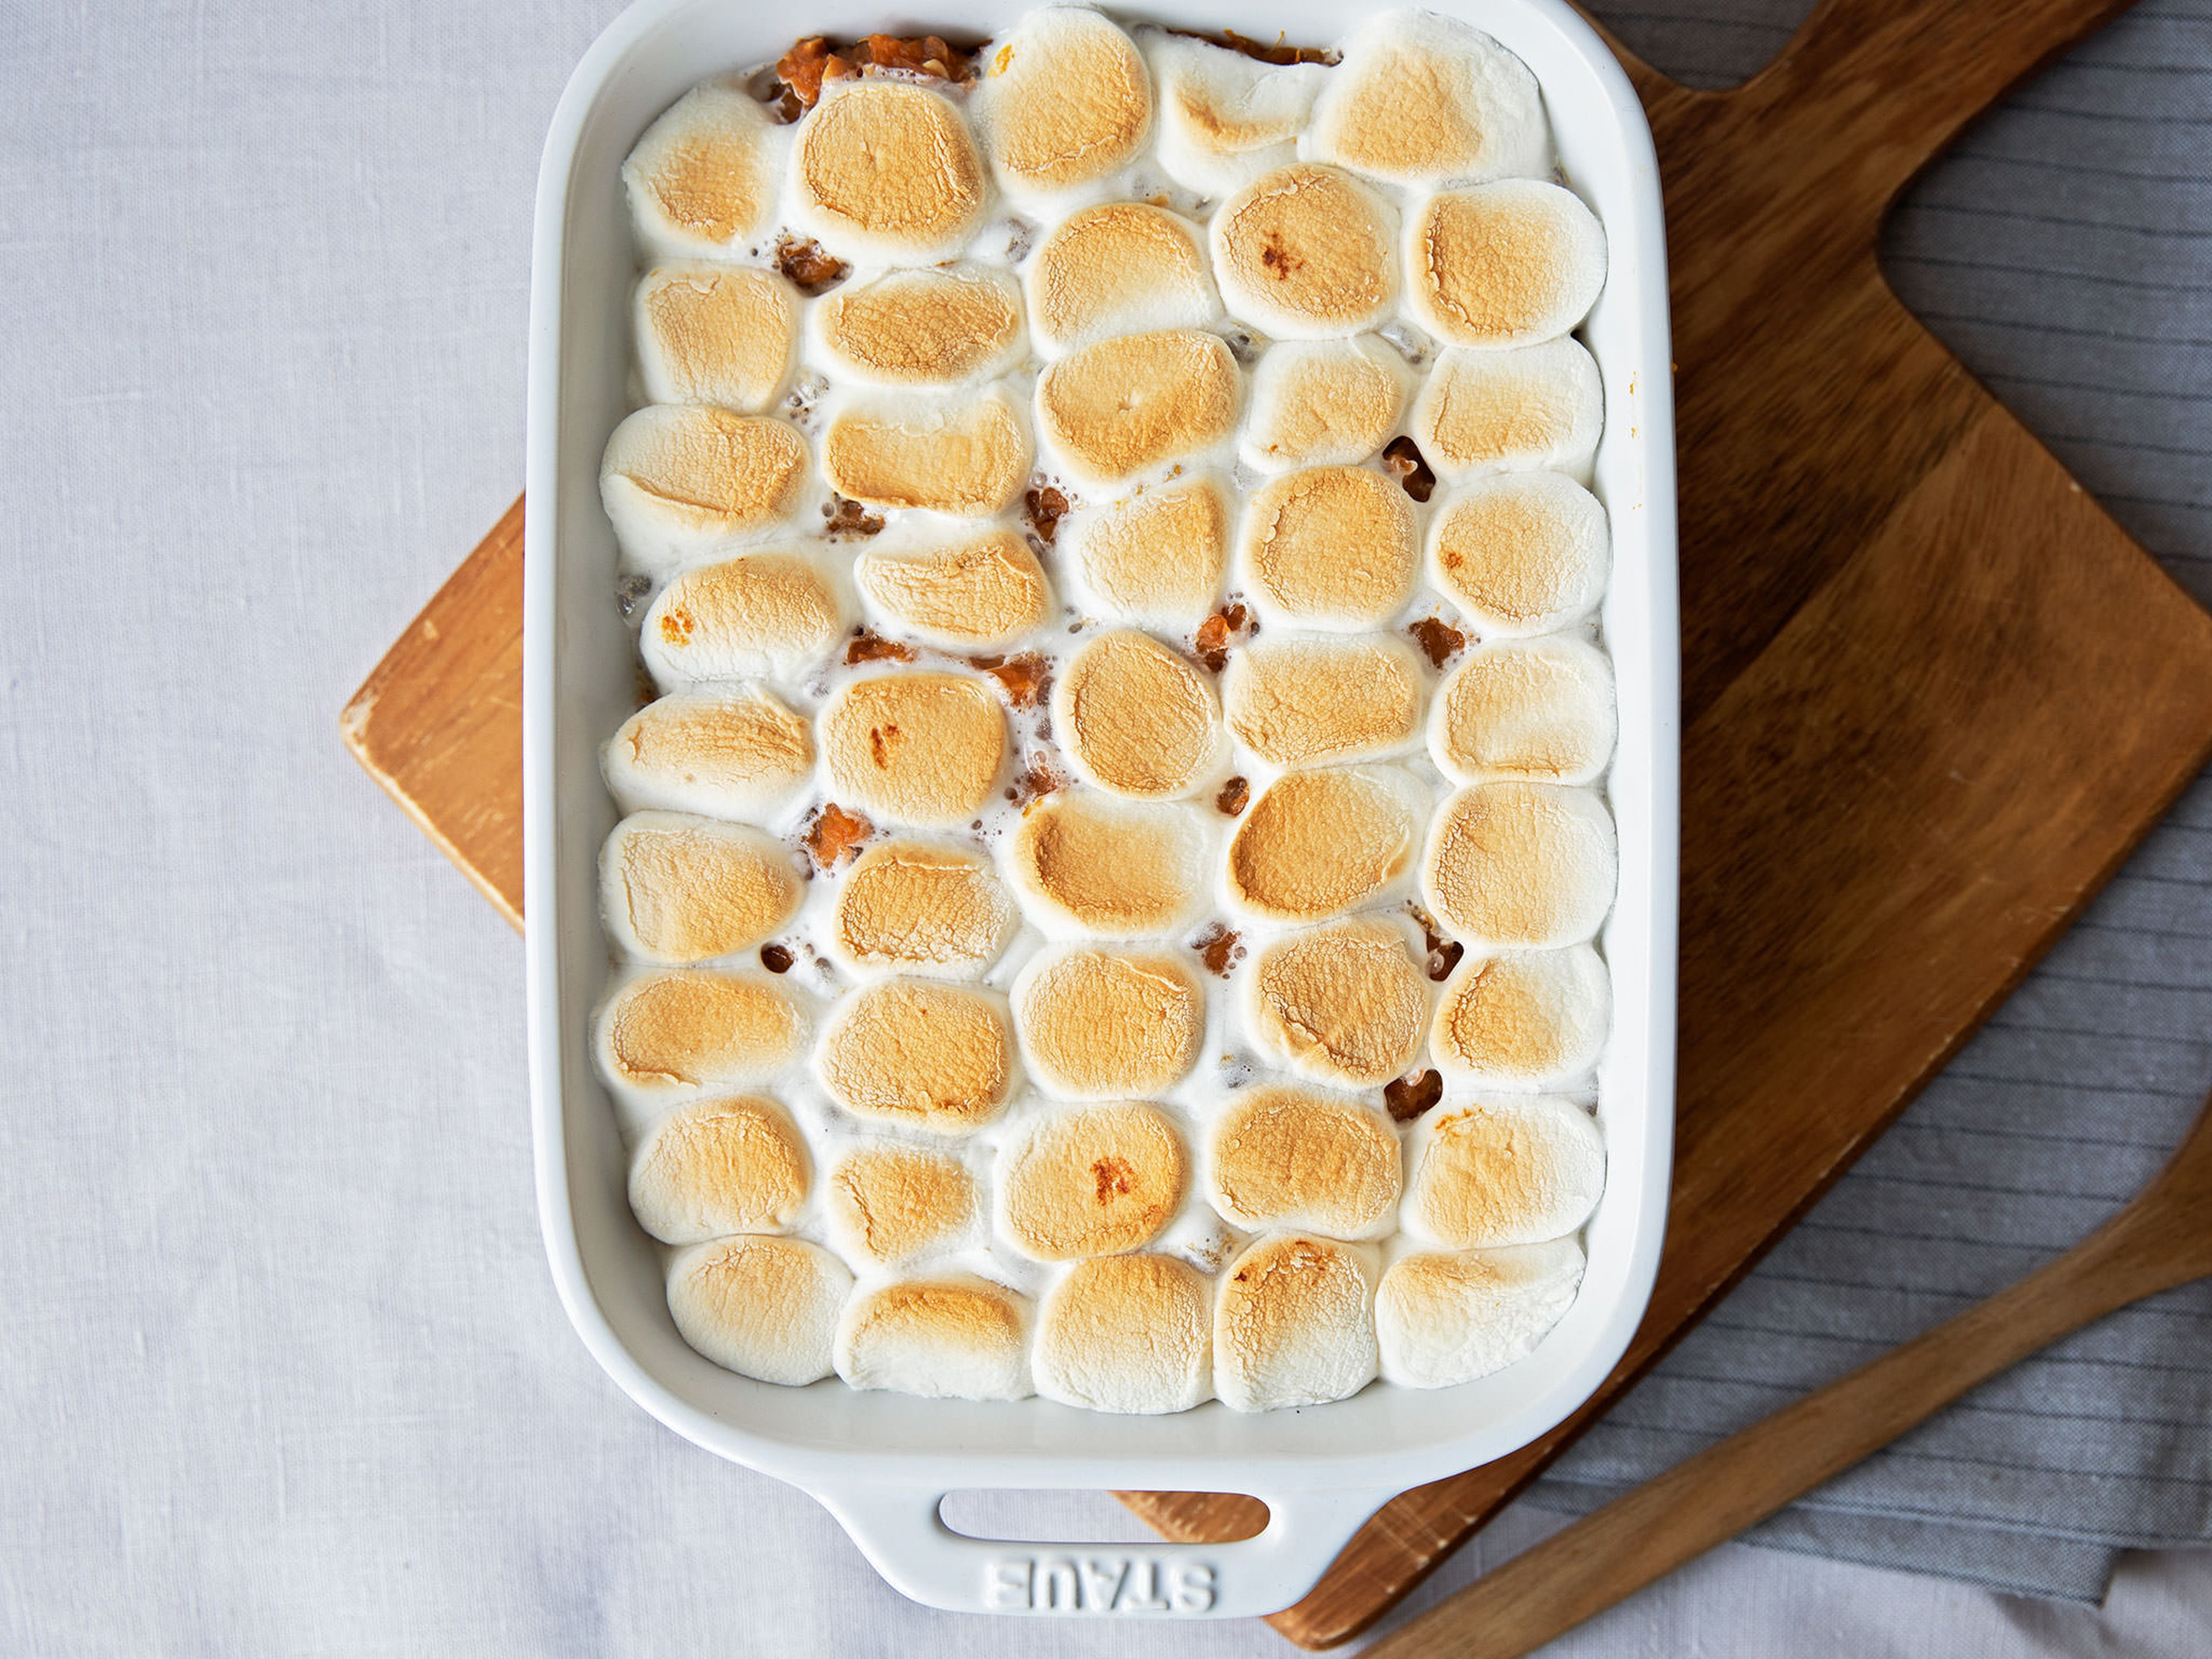 Granny’s sweet potatoes with peanut butter and marshmallows